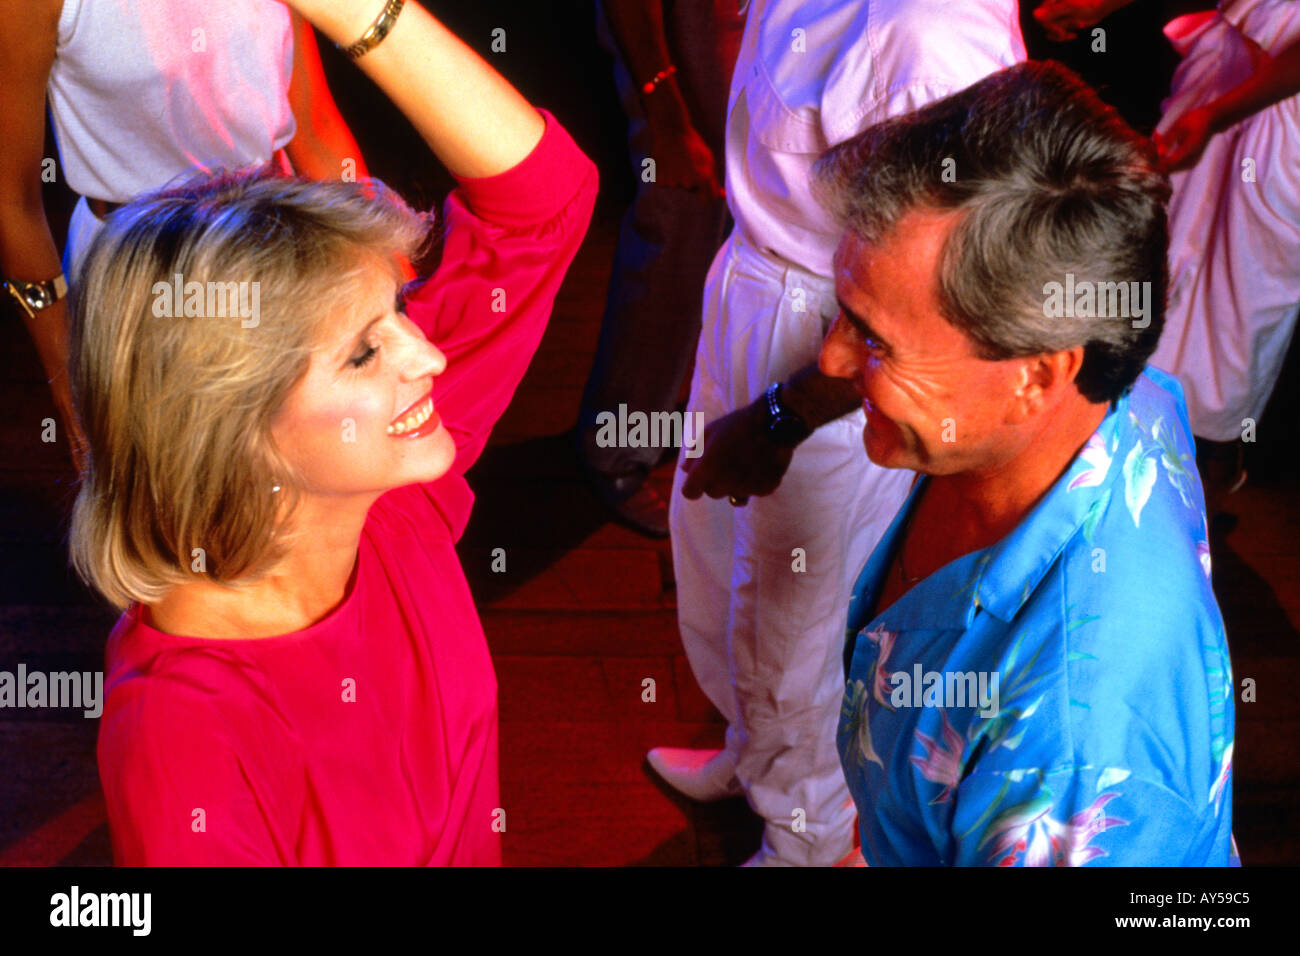 Couple 50s Dancing at a Caribbean Night Club Stock Photo